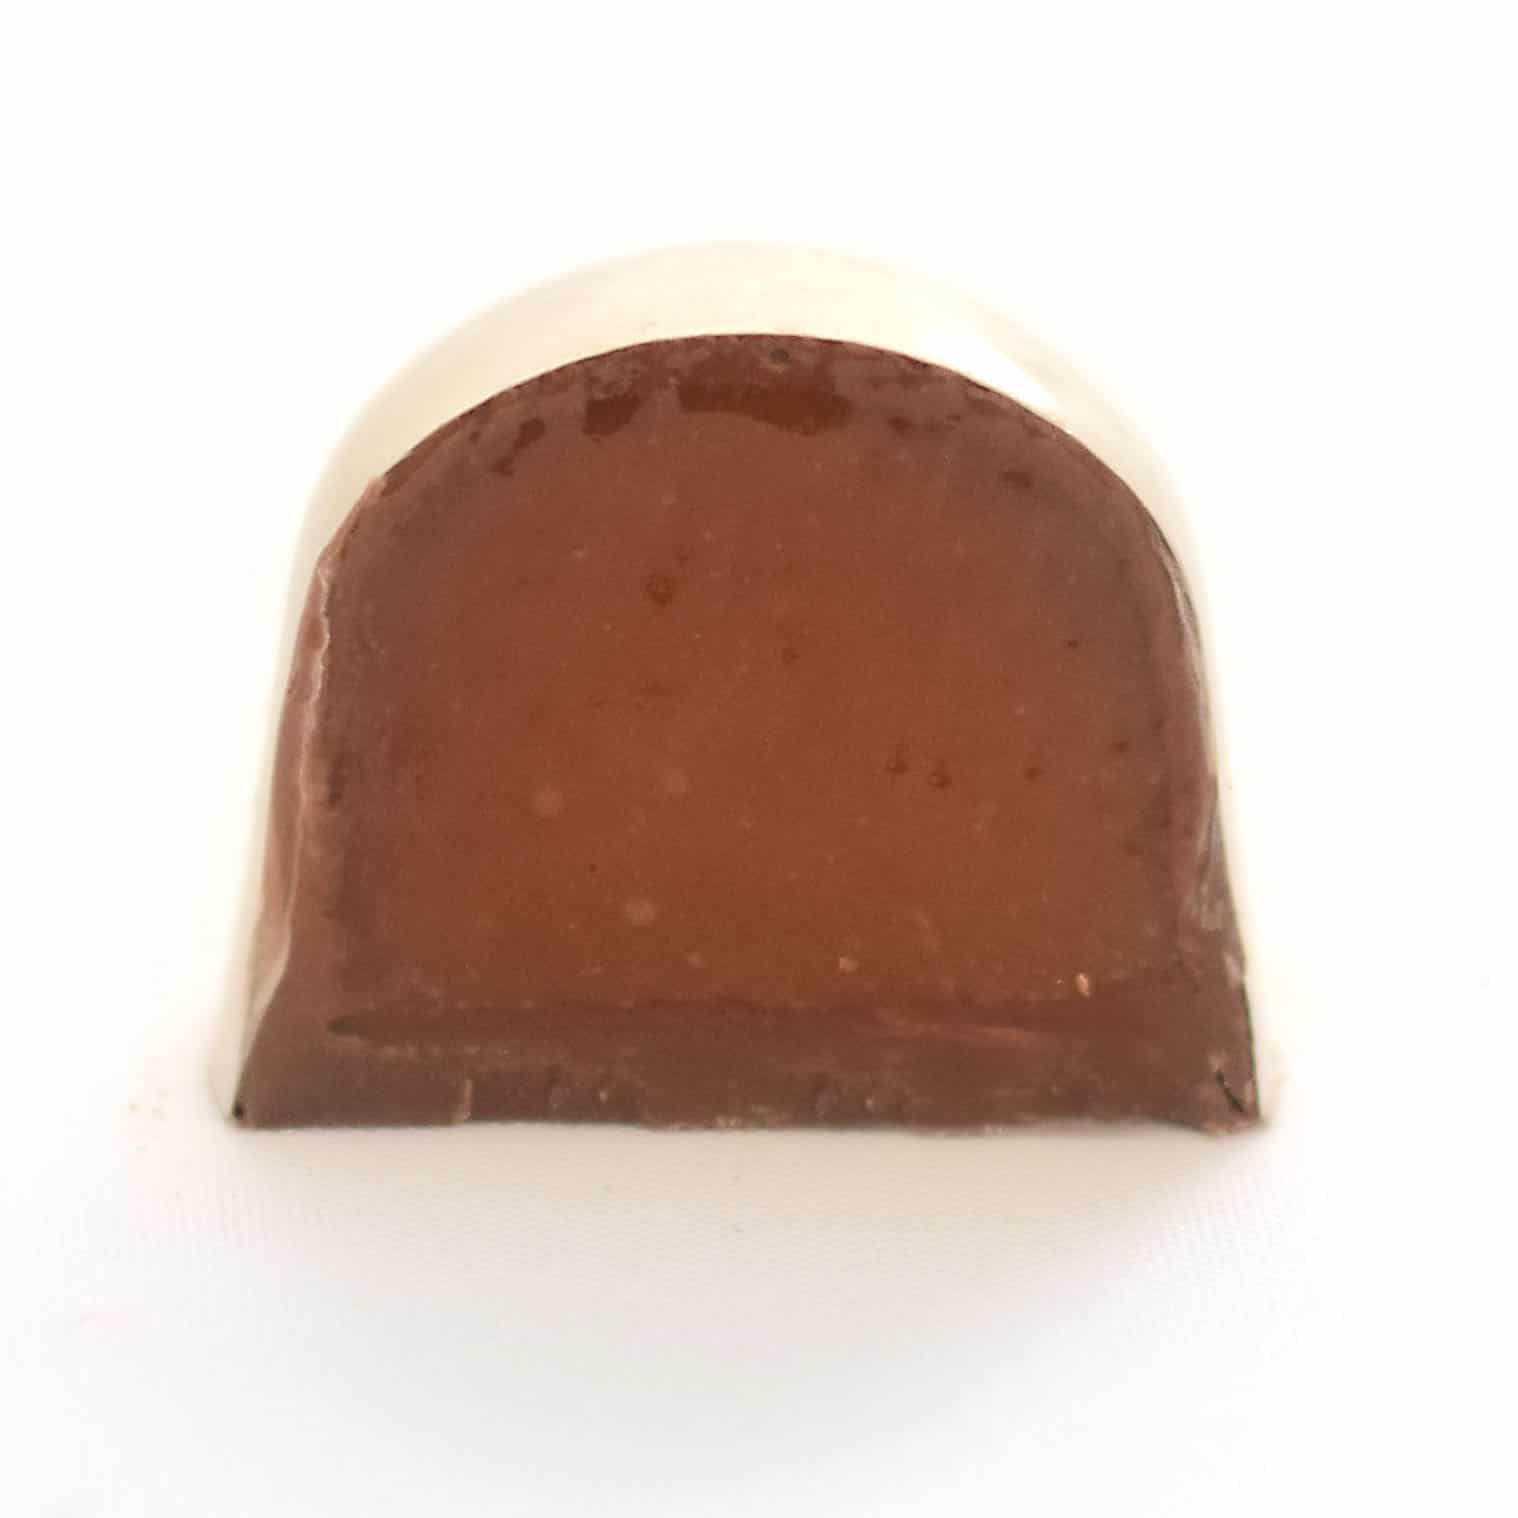 Inside view of a gourmet chocolate truffle that is filled with salted caramel